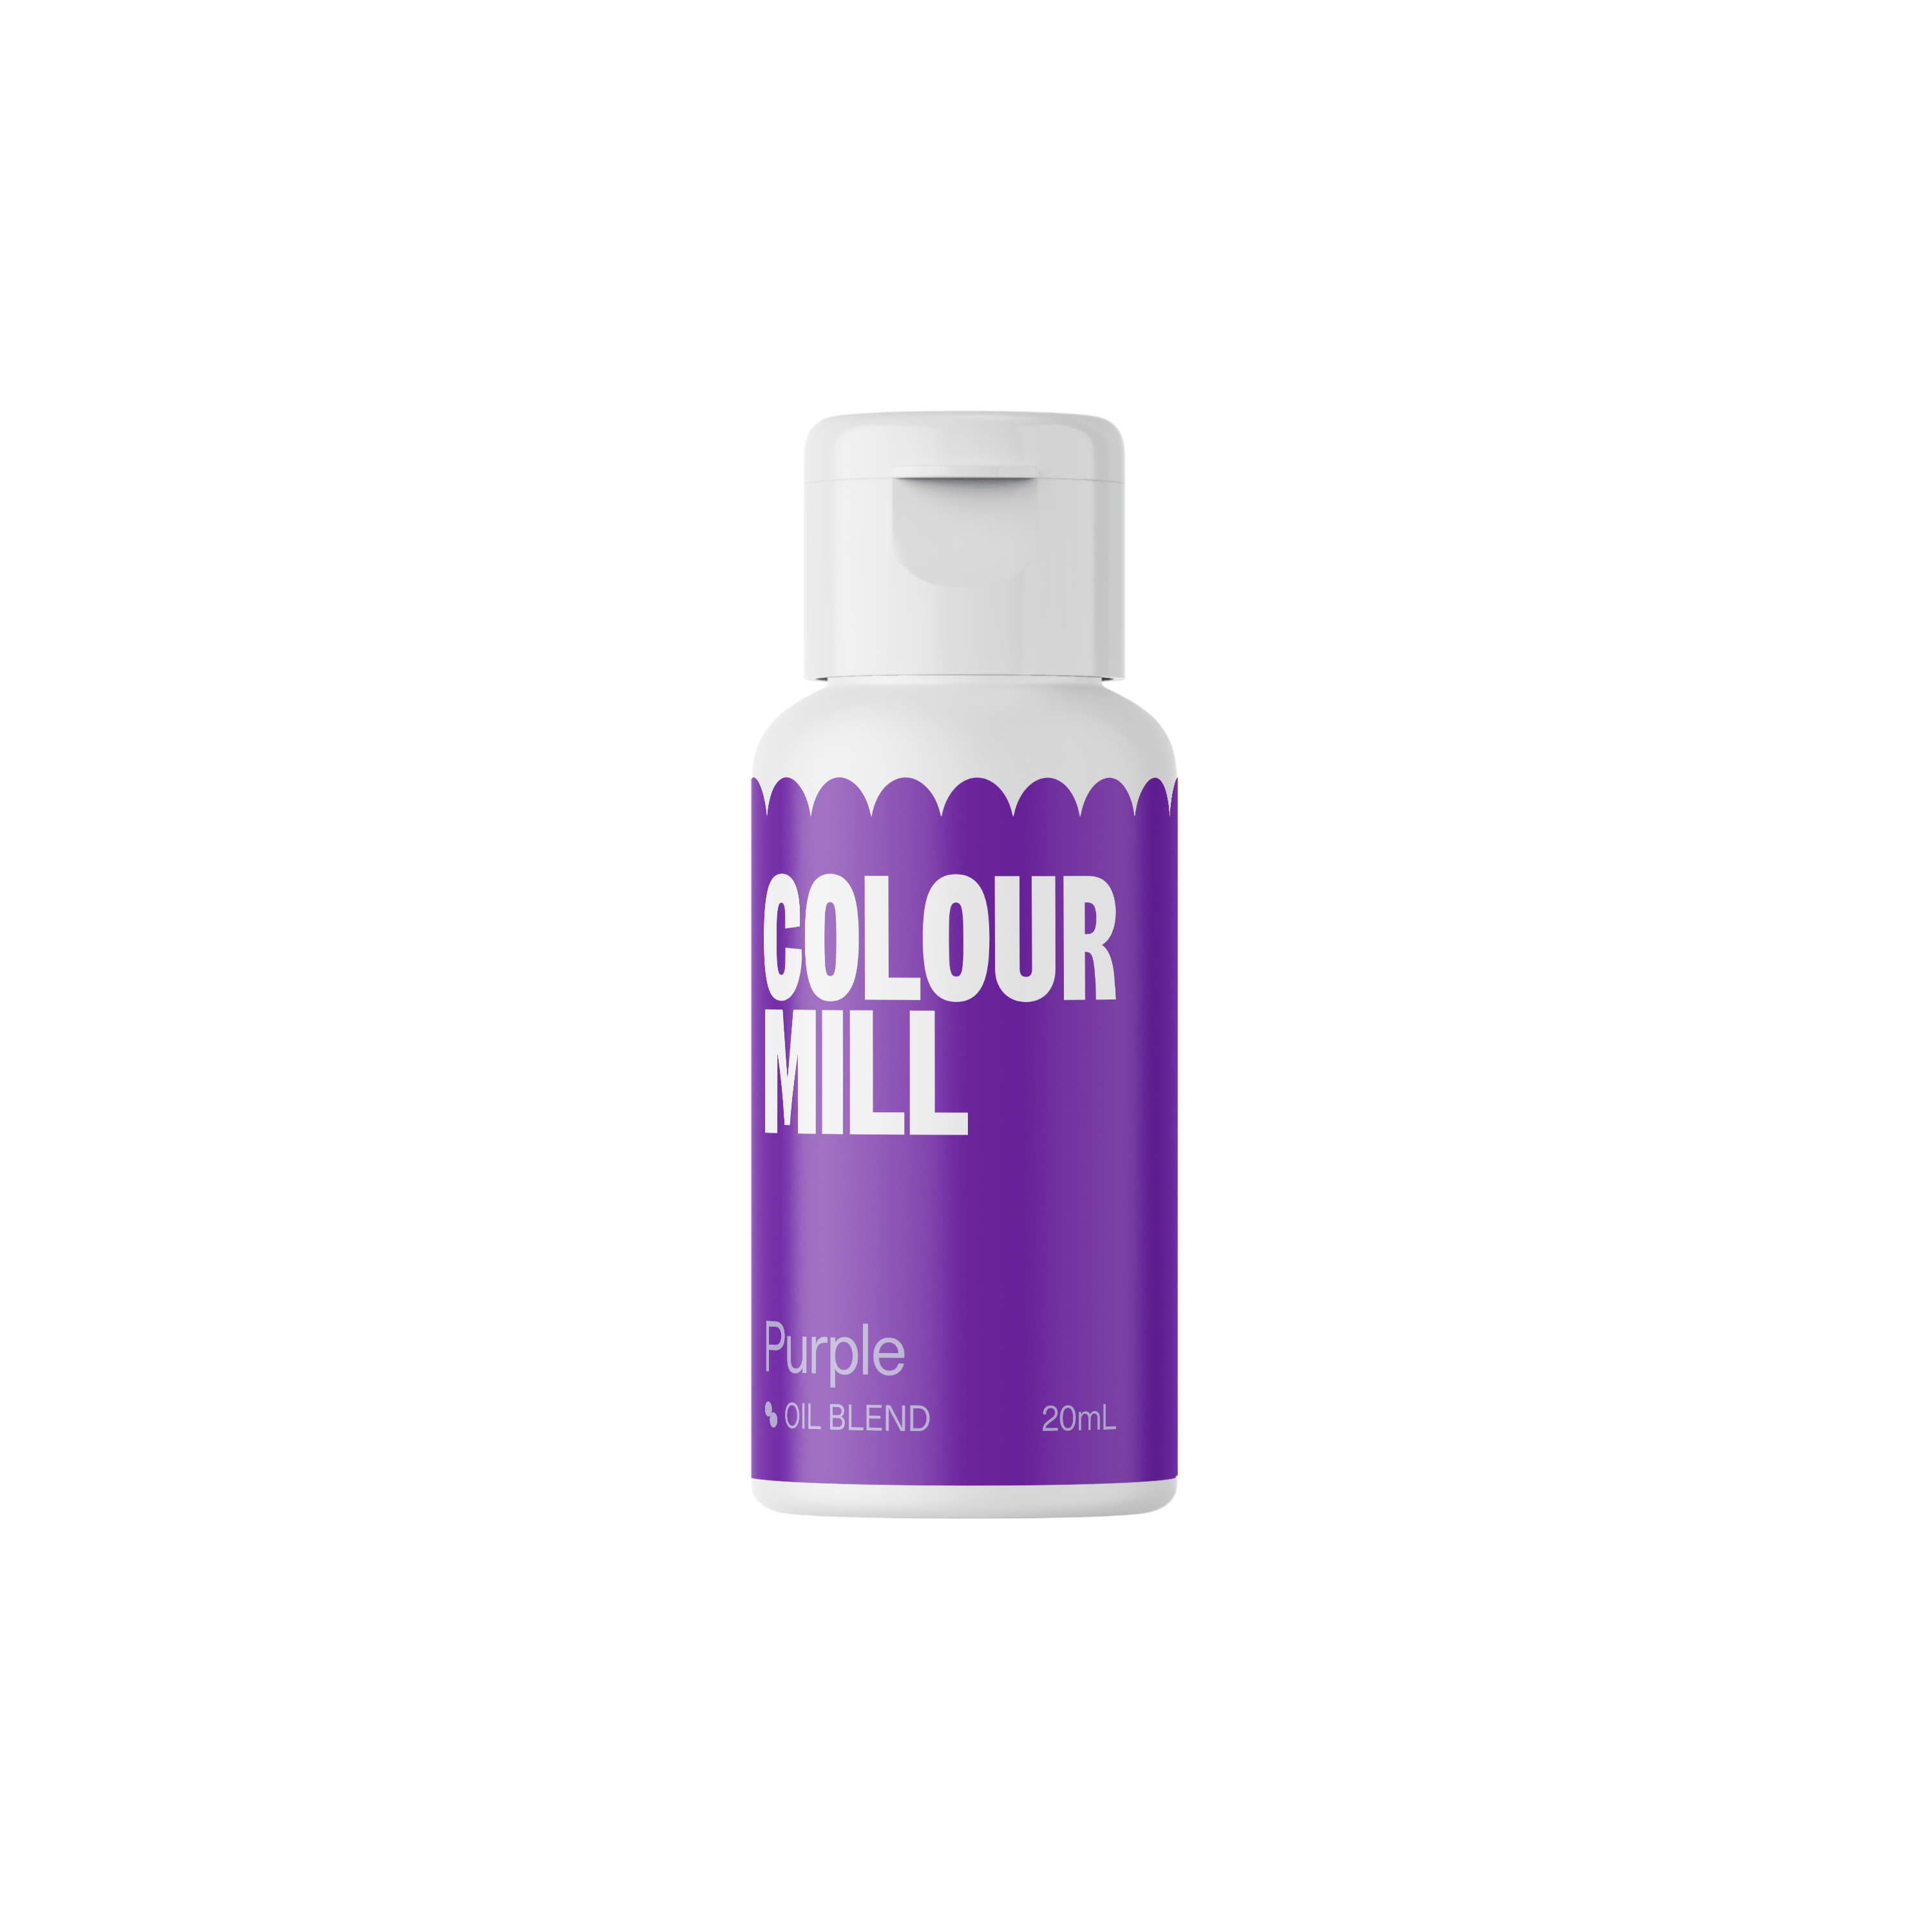 Purple - Oil Blendproduct image